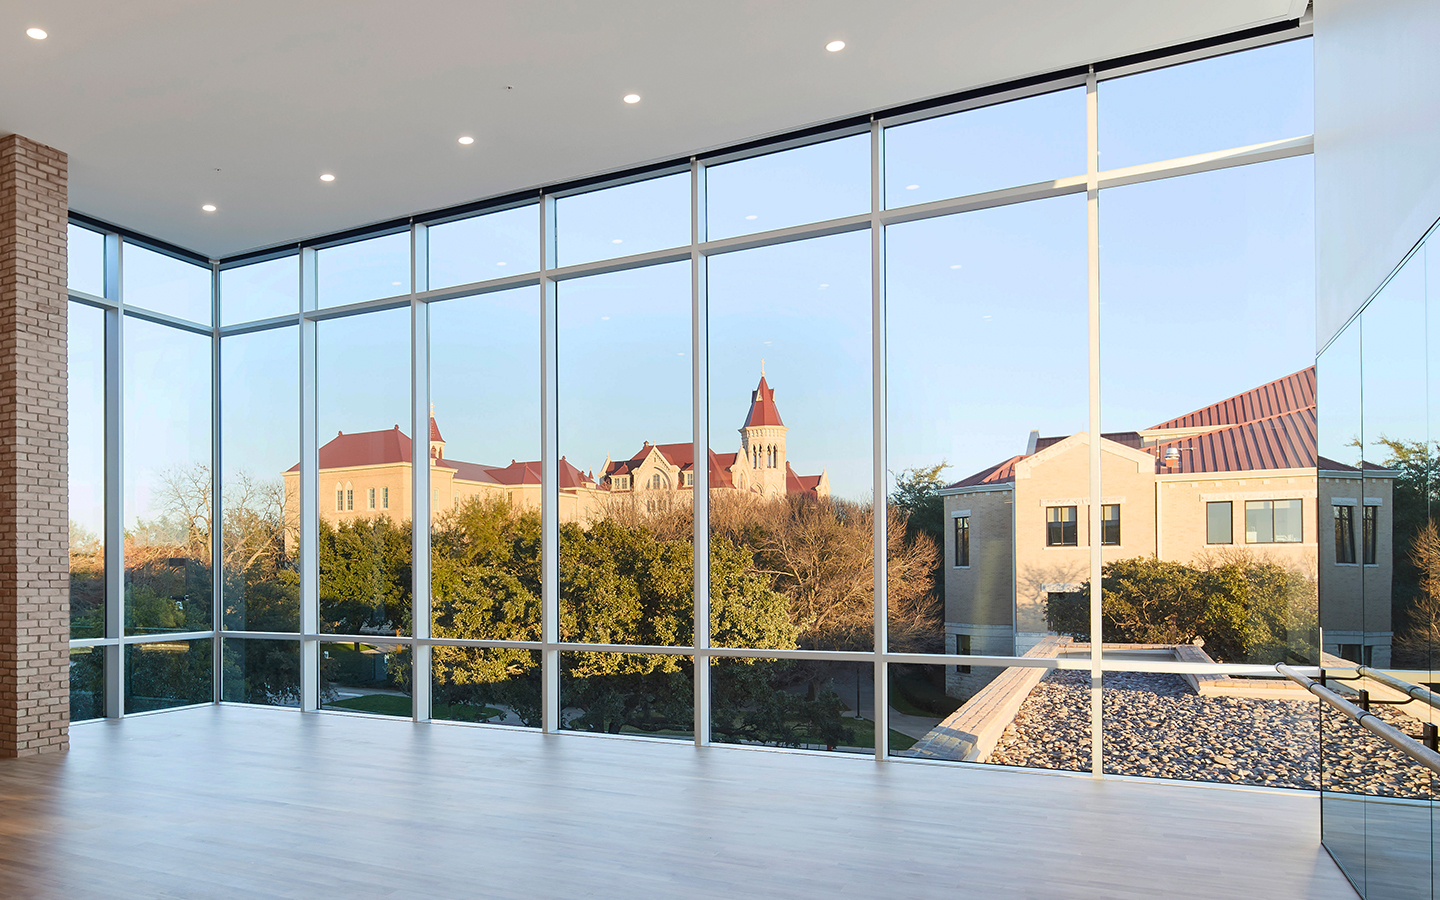 Multi-purpose space of Recreation and Athletic Center by Specht Novak Architects, showcasing the windows creating brightness in the space and connecting the user to the campus beyond. Shot by Andrea Calo.